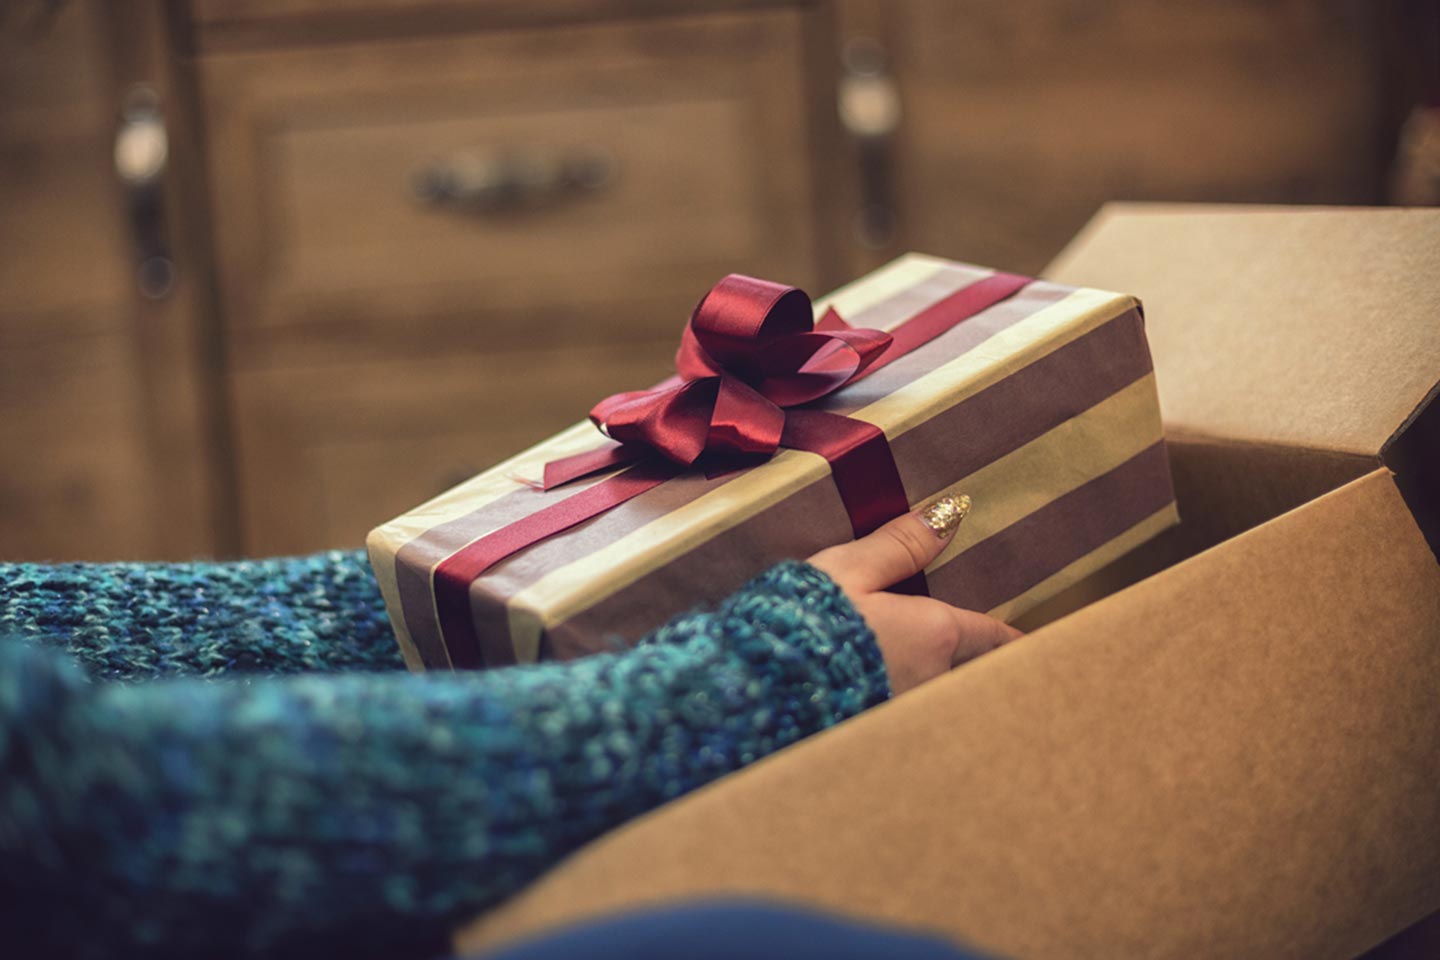 Woman taking a wrapped holiday present out of a box